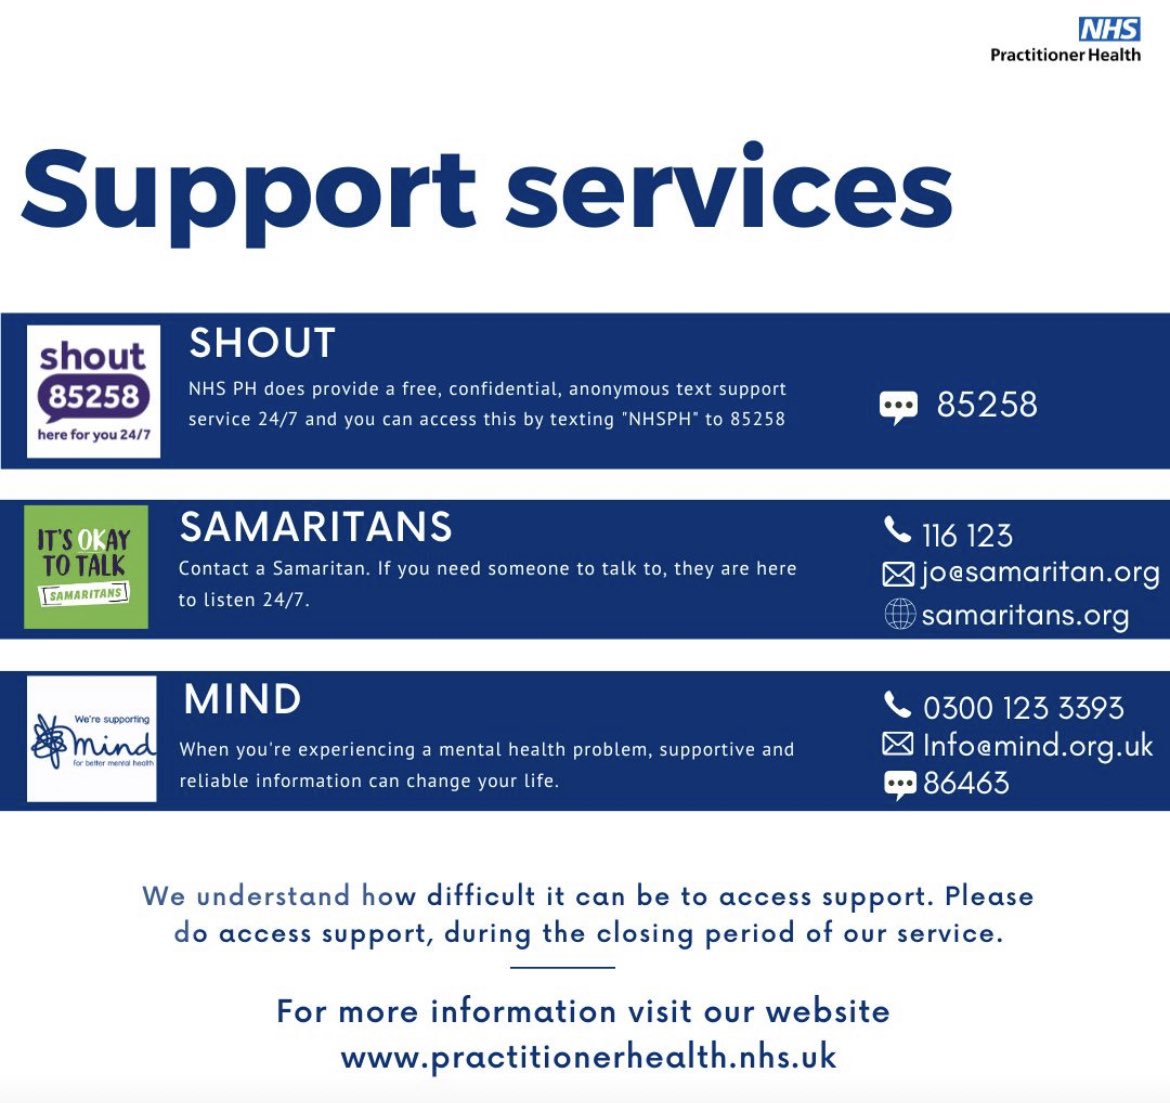 If you have been impacted by the stories shown in tonight’s episode, please reach out. Your well-being matters and you are not alone. Visit our website for further information on support services available #HealthcareHeroes #MentalHealthMatters #NHSPractitionerHealth